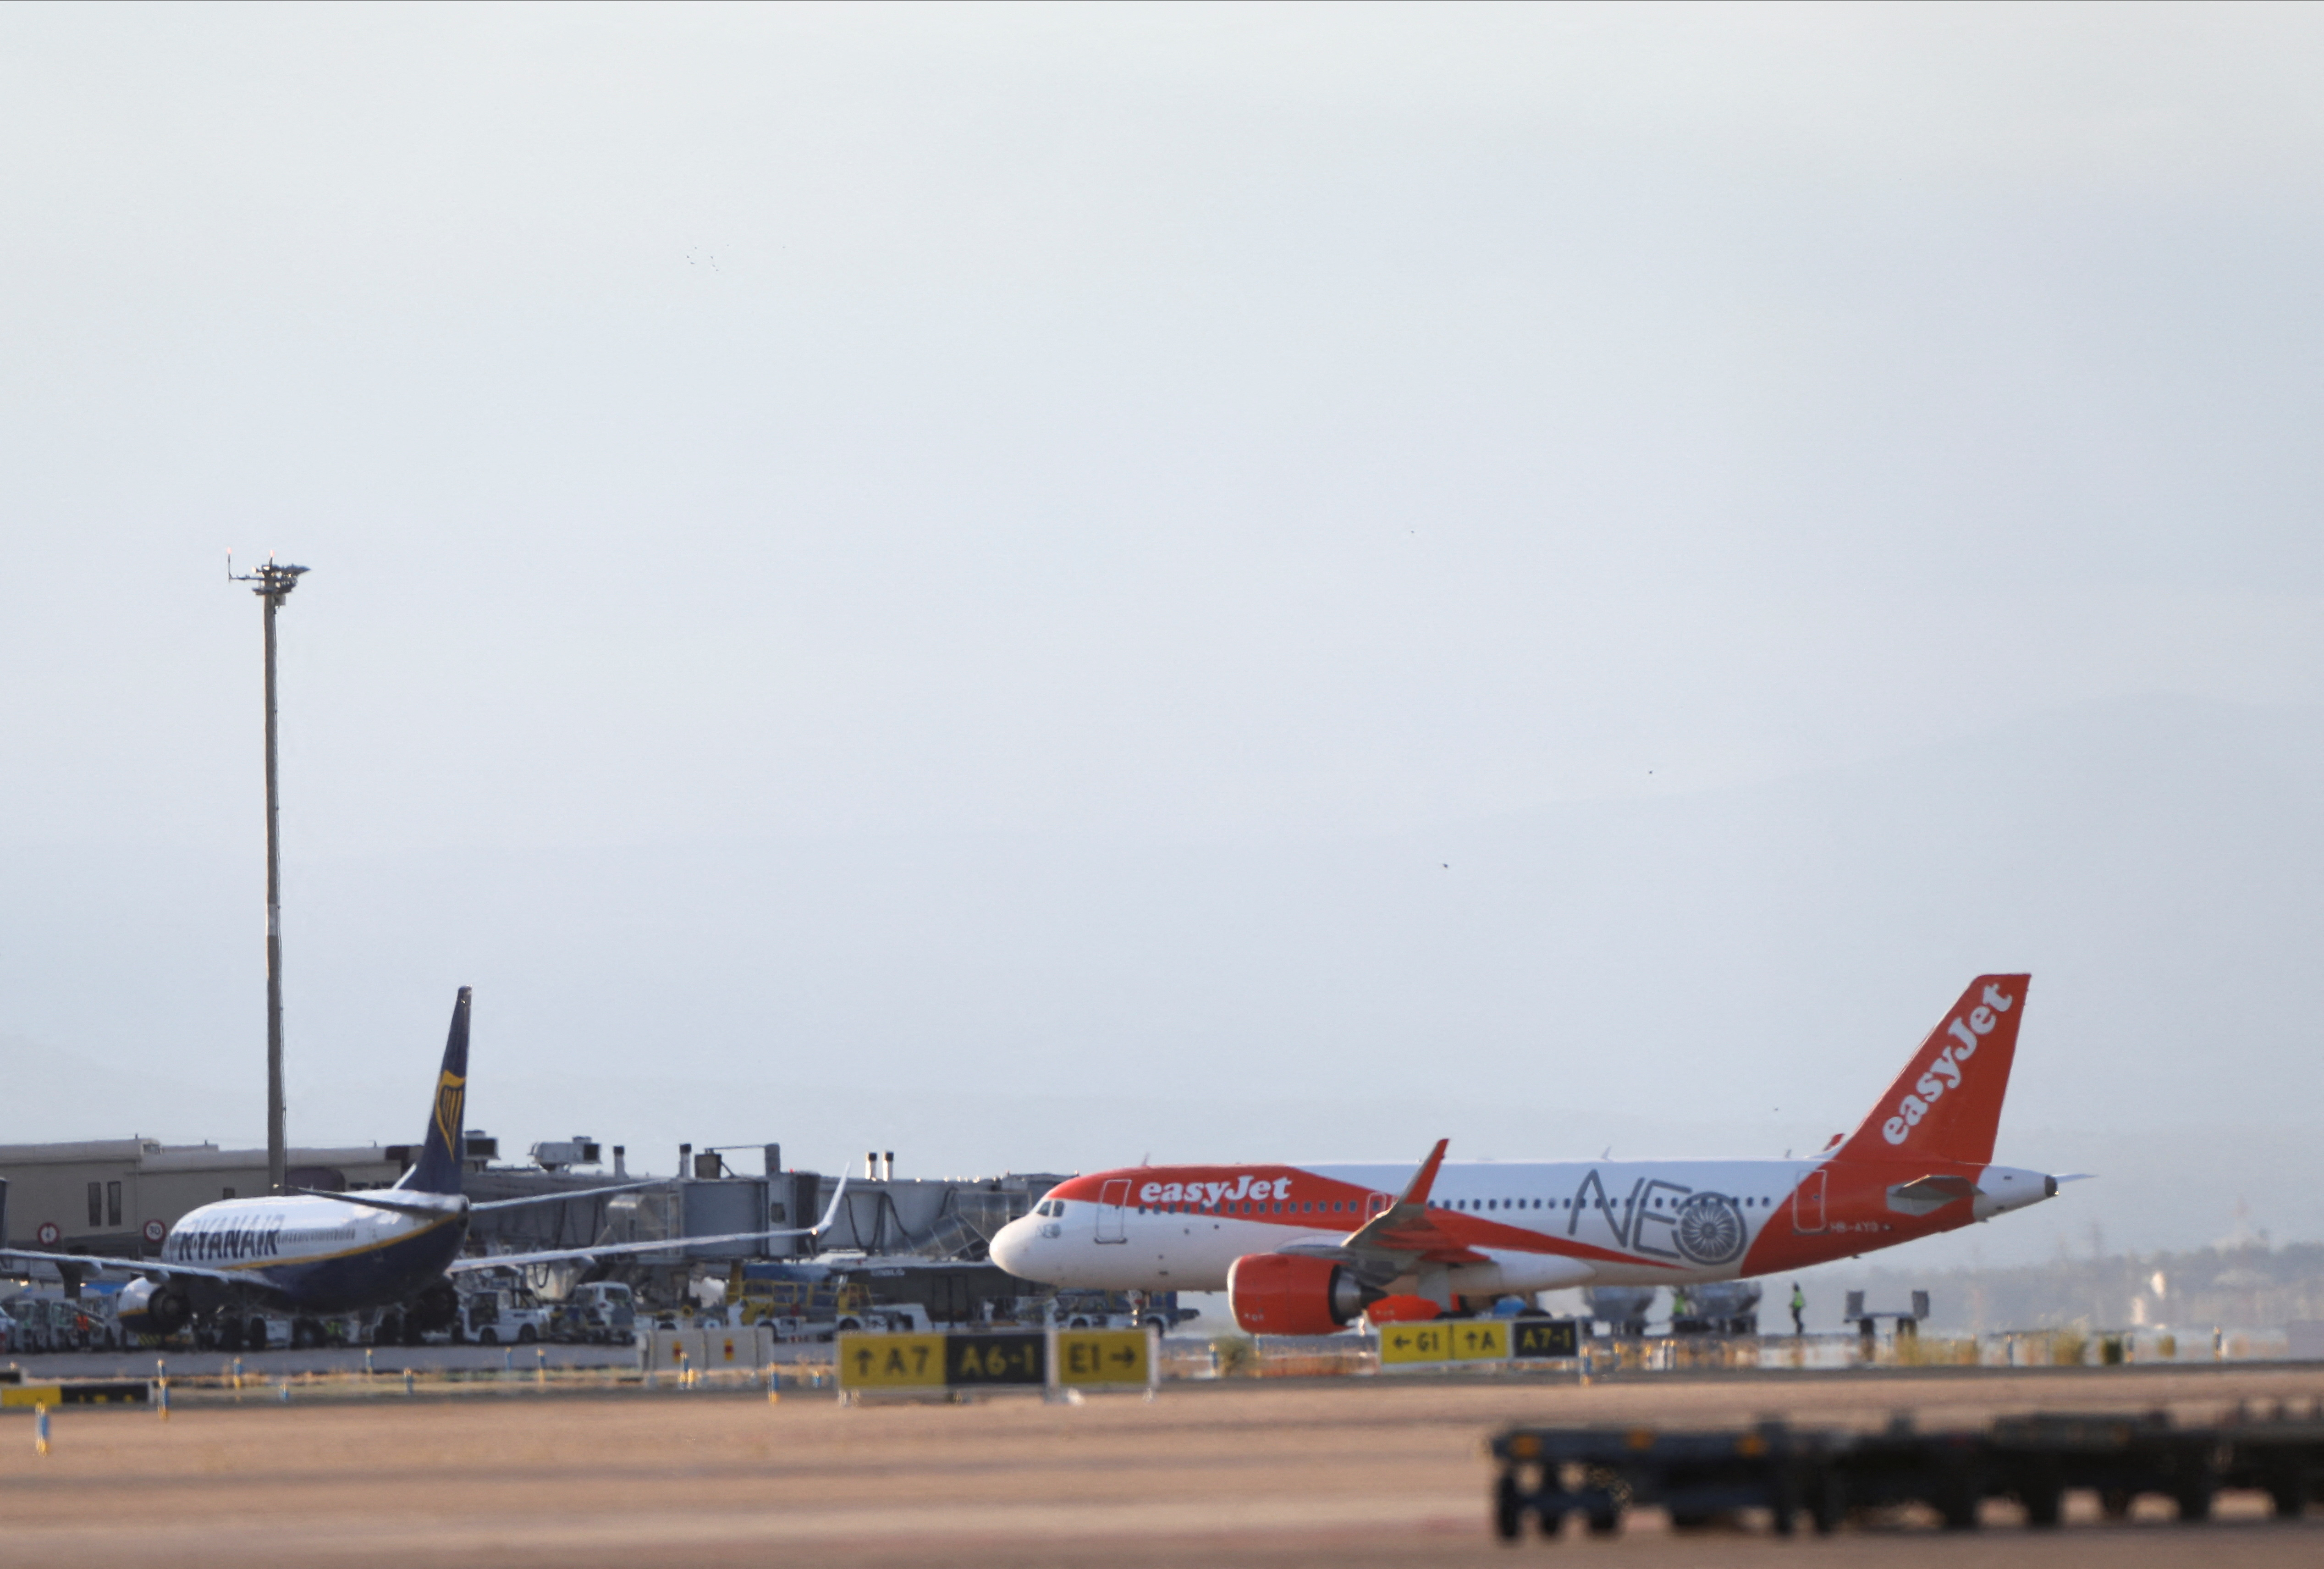 A Ryanair Boeing 737-8AS and an easyJet Airbus A320neo aircraft parked are seen on the tarmac of Adolfo Suarez Madrid-Barajas Airport, in Madrid